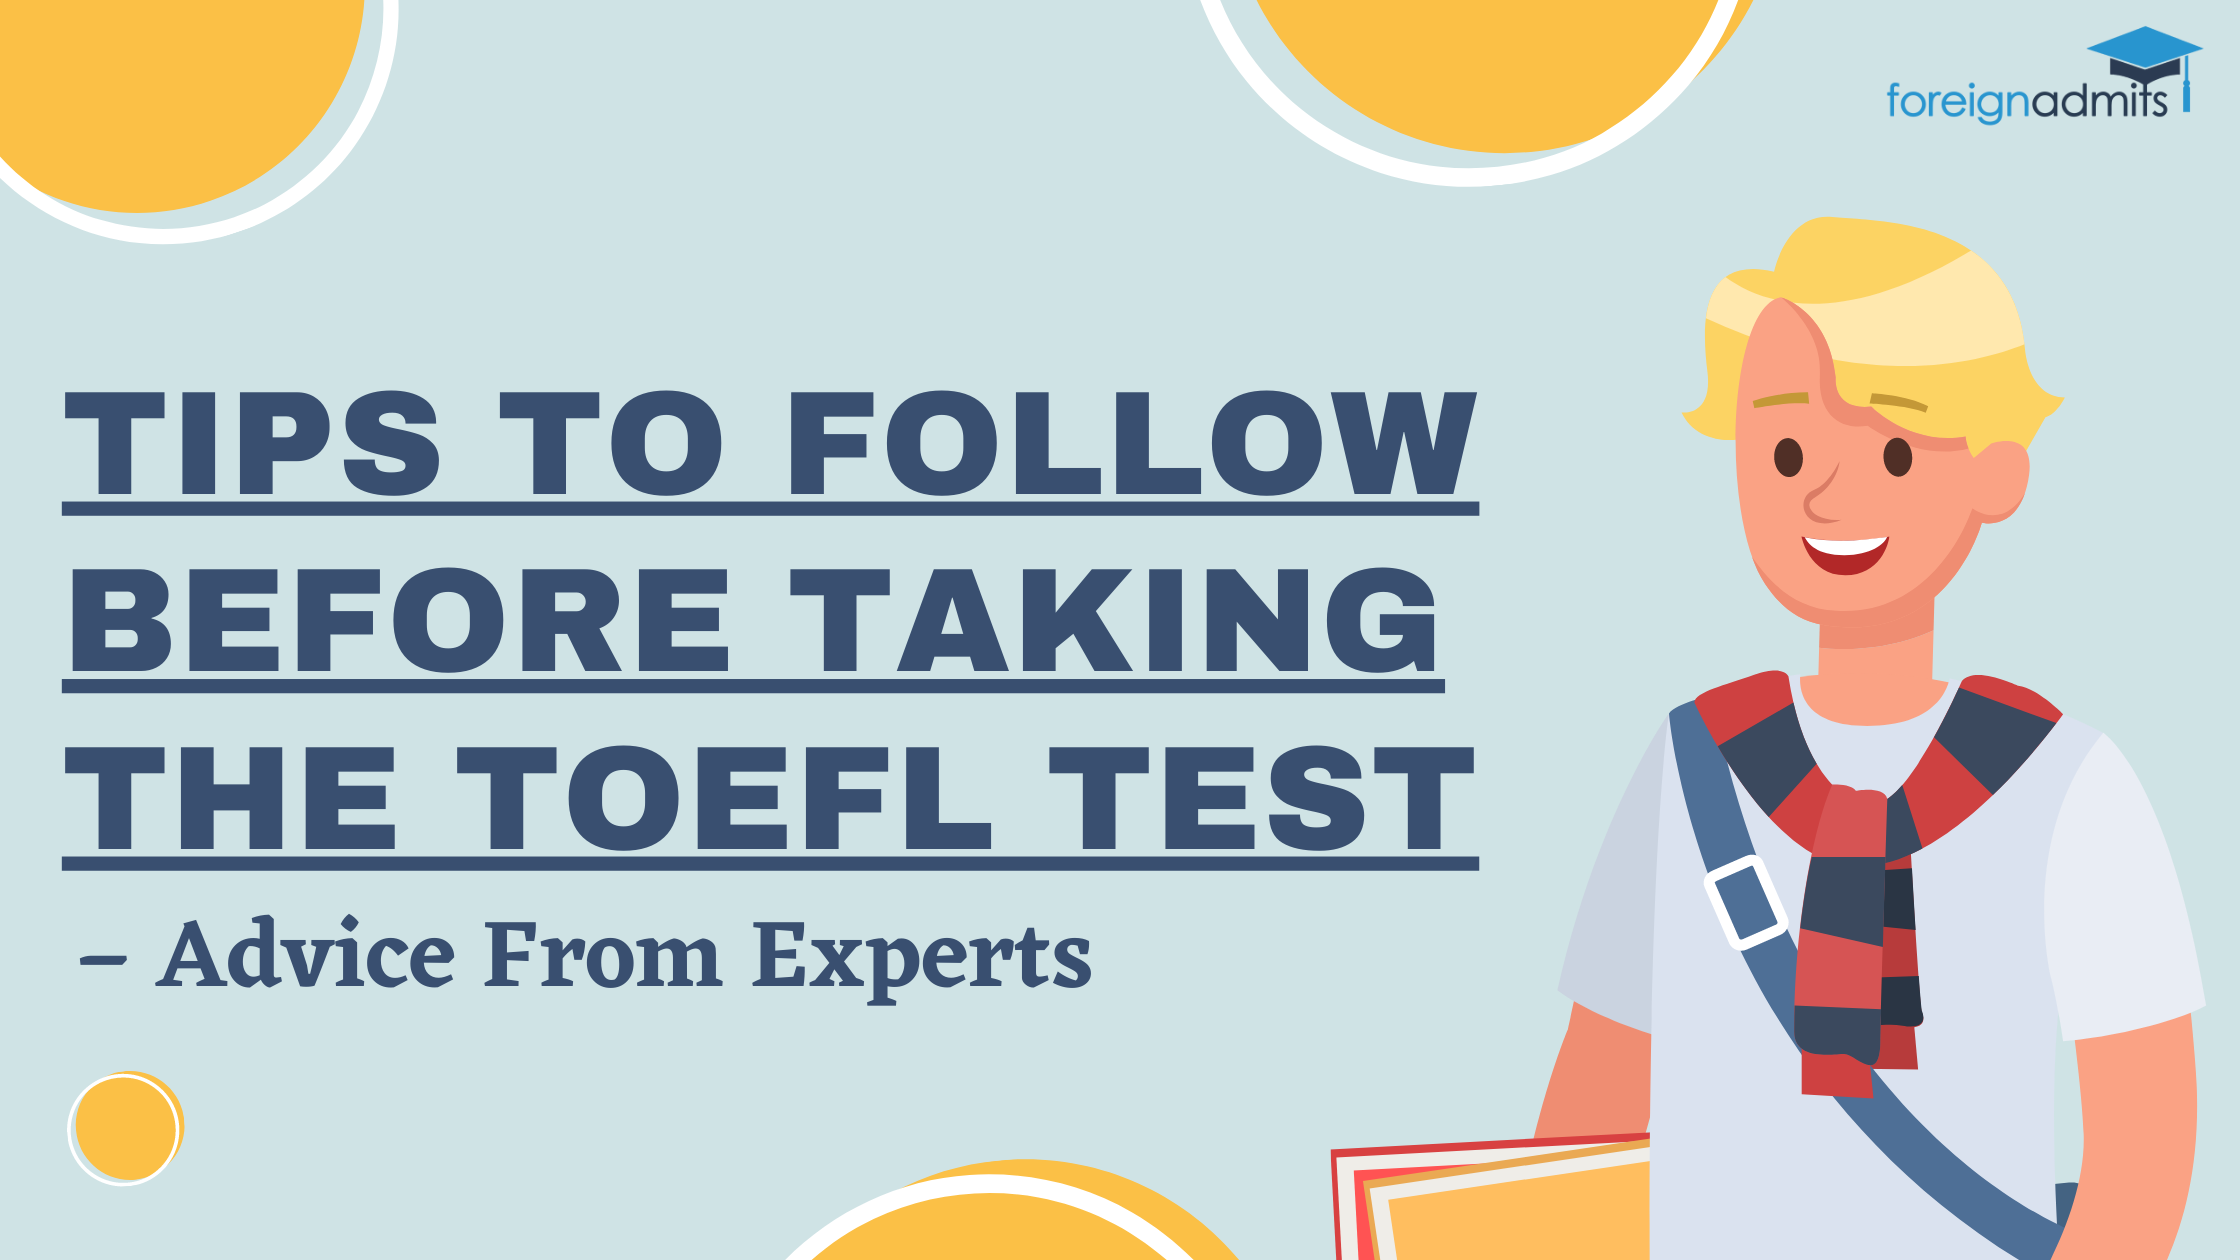 Tips to Follow Before Taking the TOEFL Test – Advice From Experts